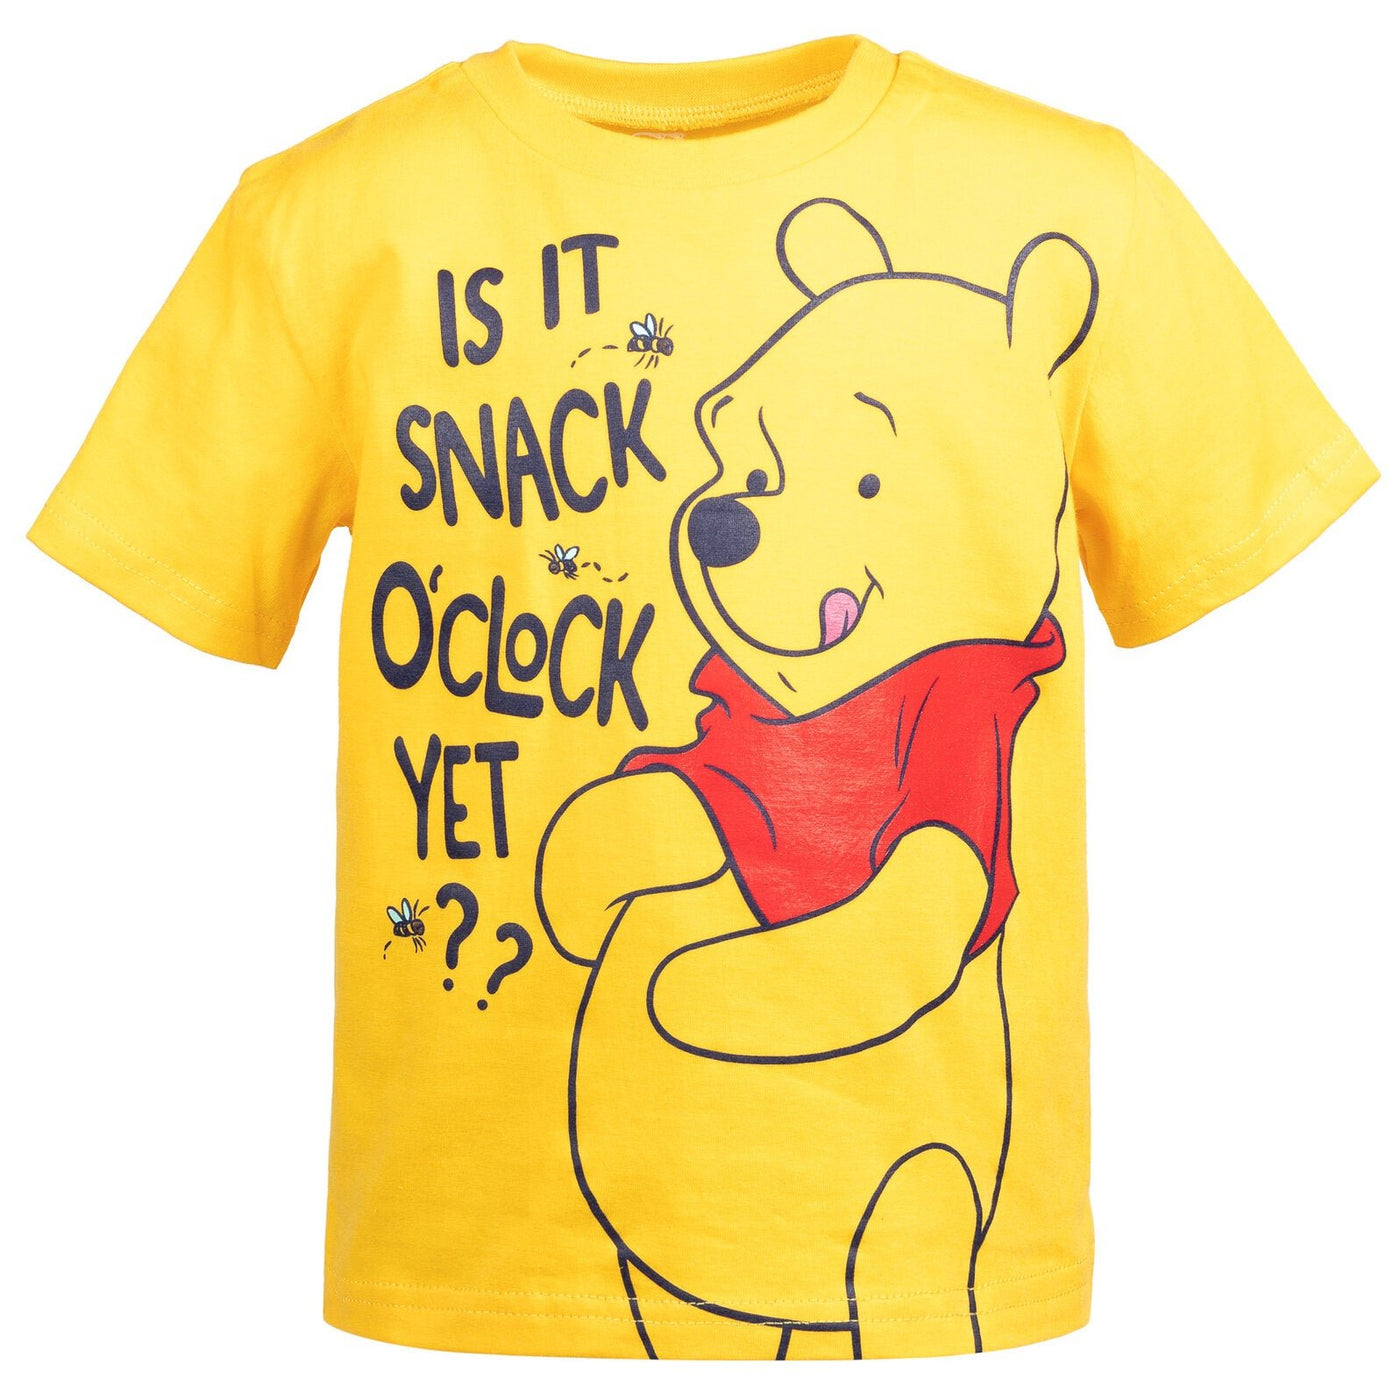 Disney Winnie the Pooh T-Shirt and Mesh Shorts Outfit Set - imagikids